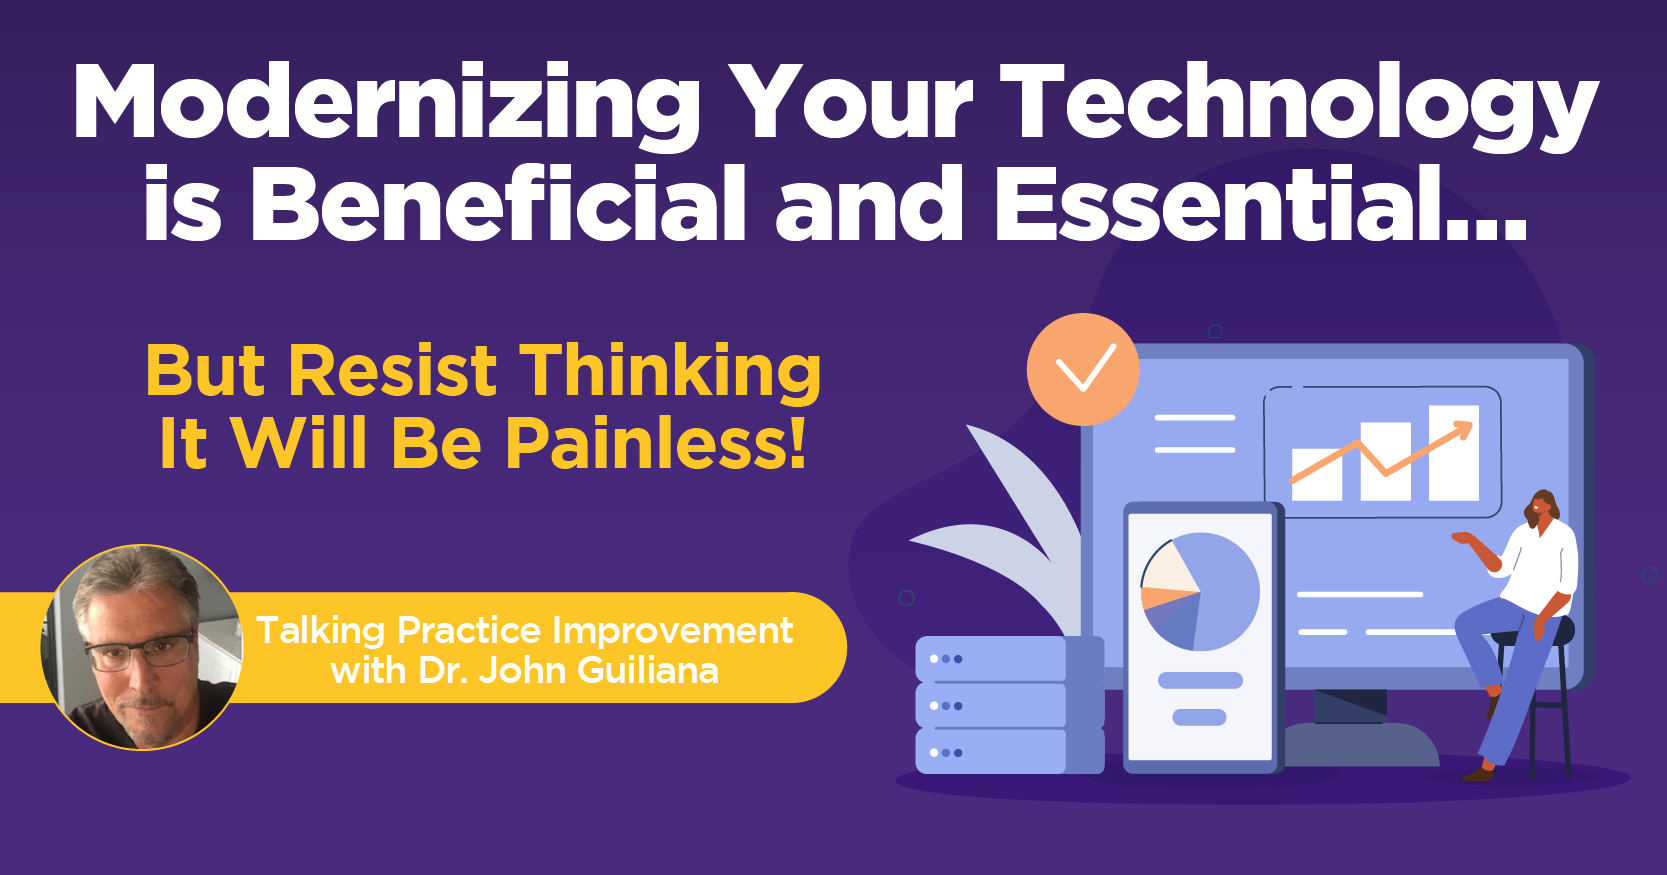 Modernizing Your Technology Is Beneficial and Essential…But Resist Thinking It Will Be Painless!